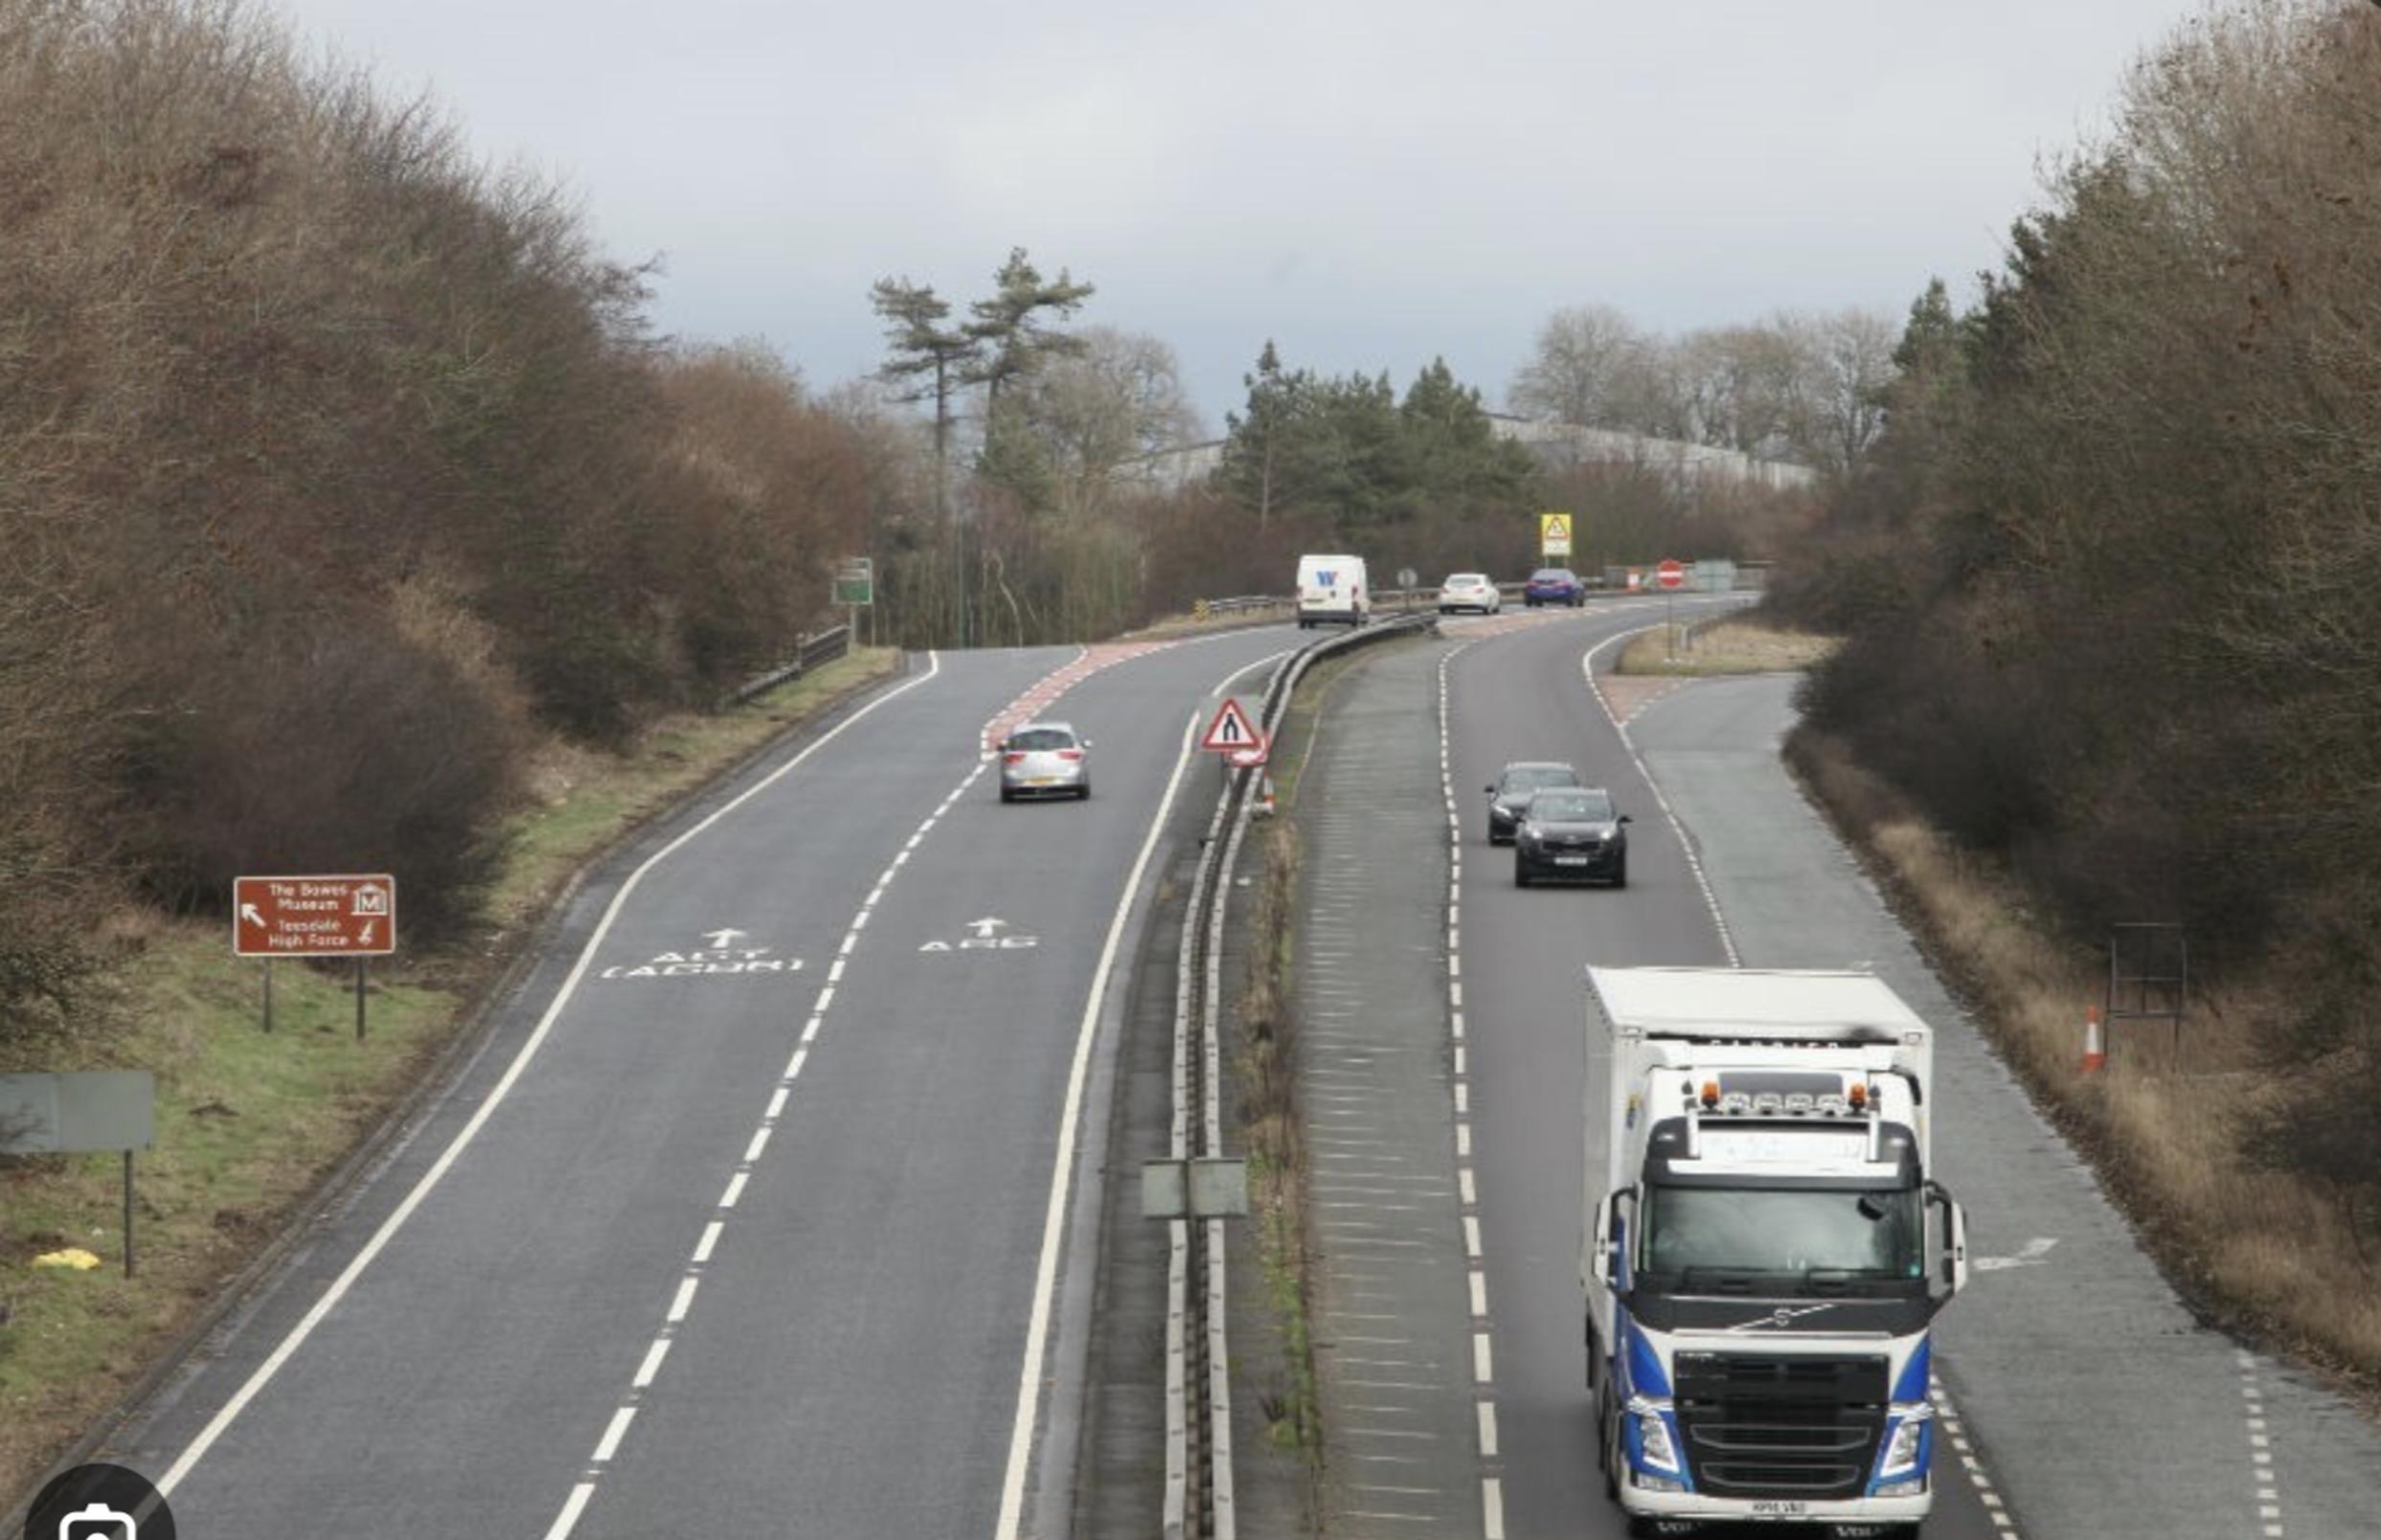 National Highways said it will continue to work on delivering the A66 Northern Trans-Pennine dualling scheme